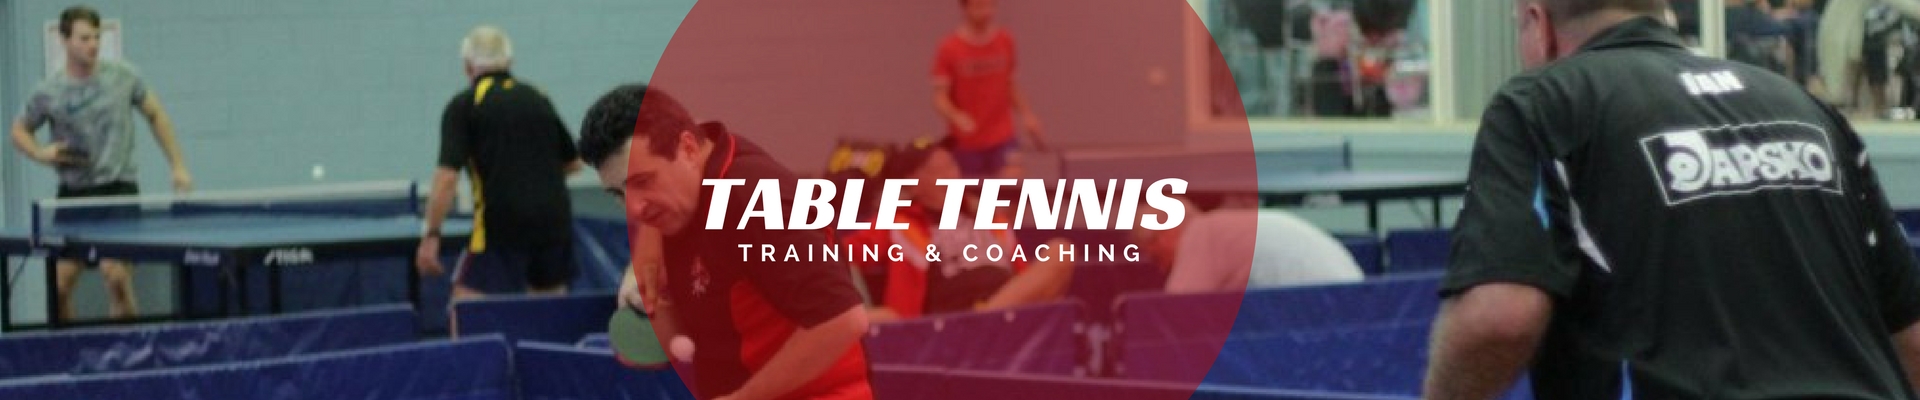 table tennis training and coaching